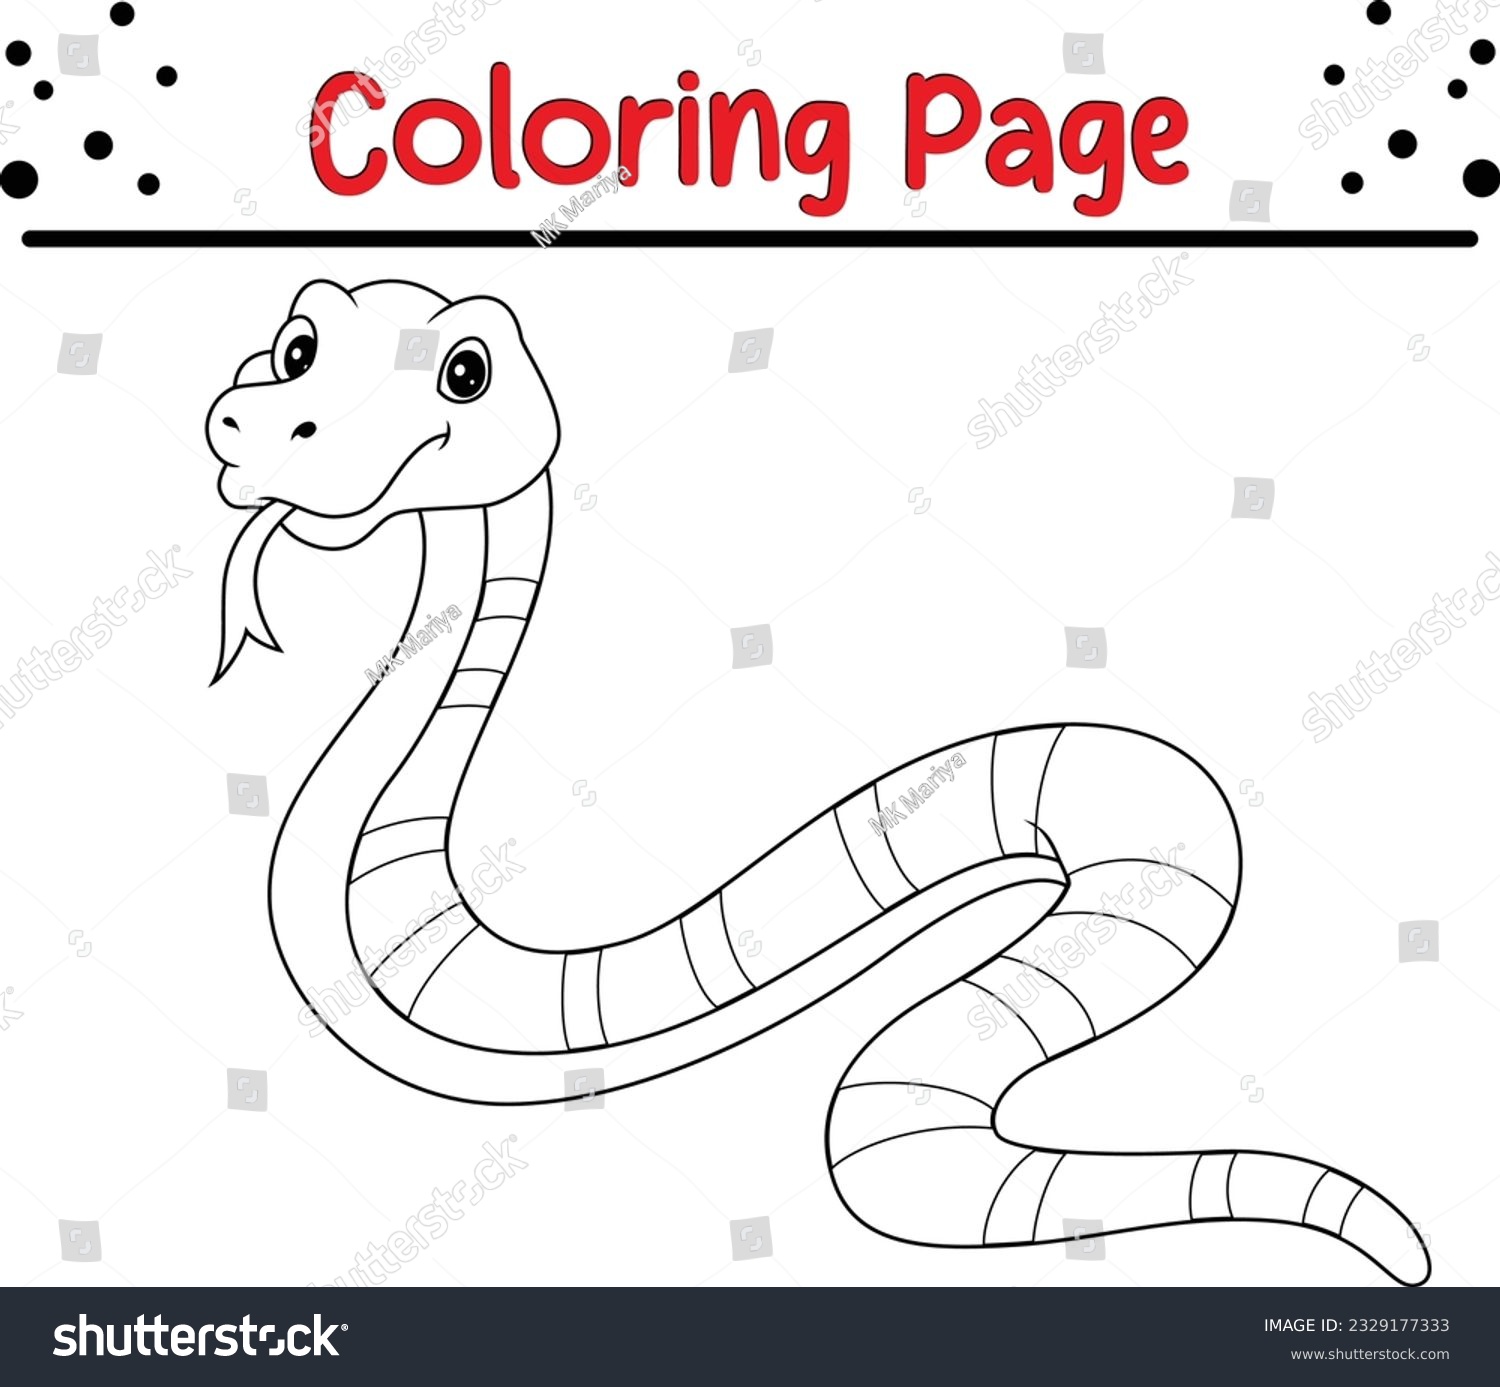 Coloring page outline cartoon snake animals stock vector royalty free